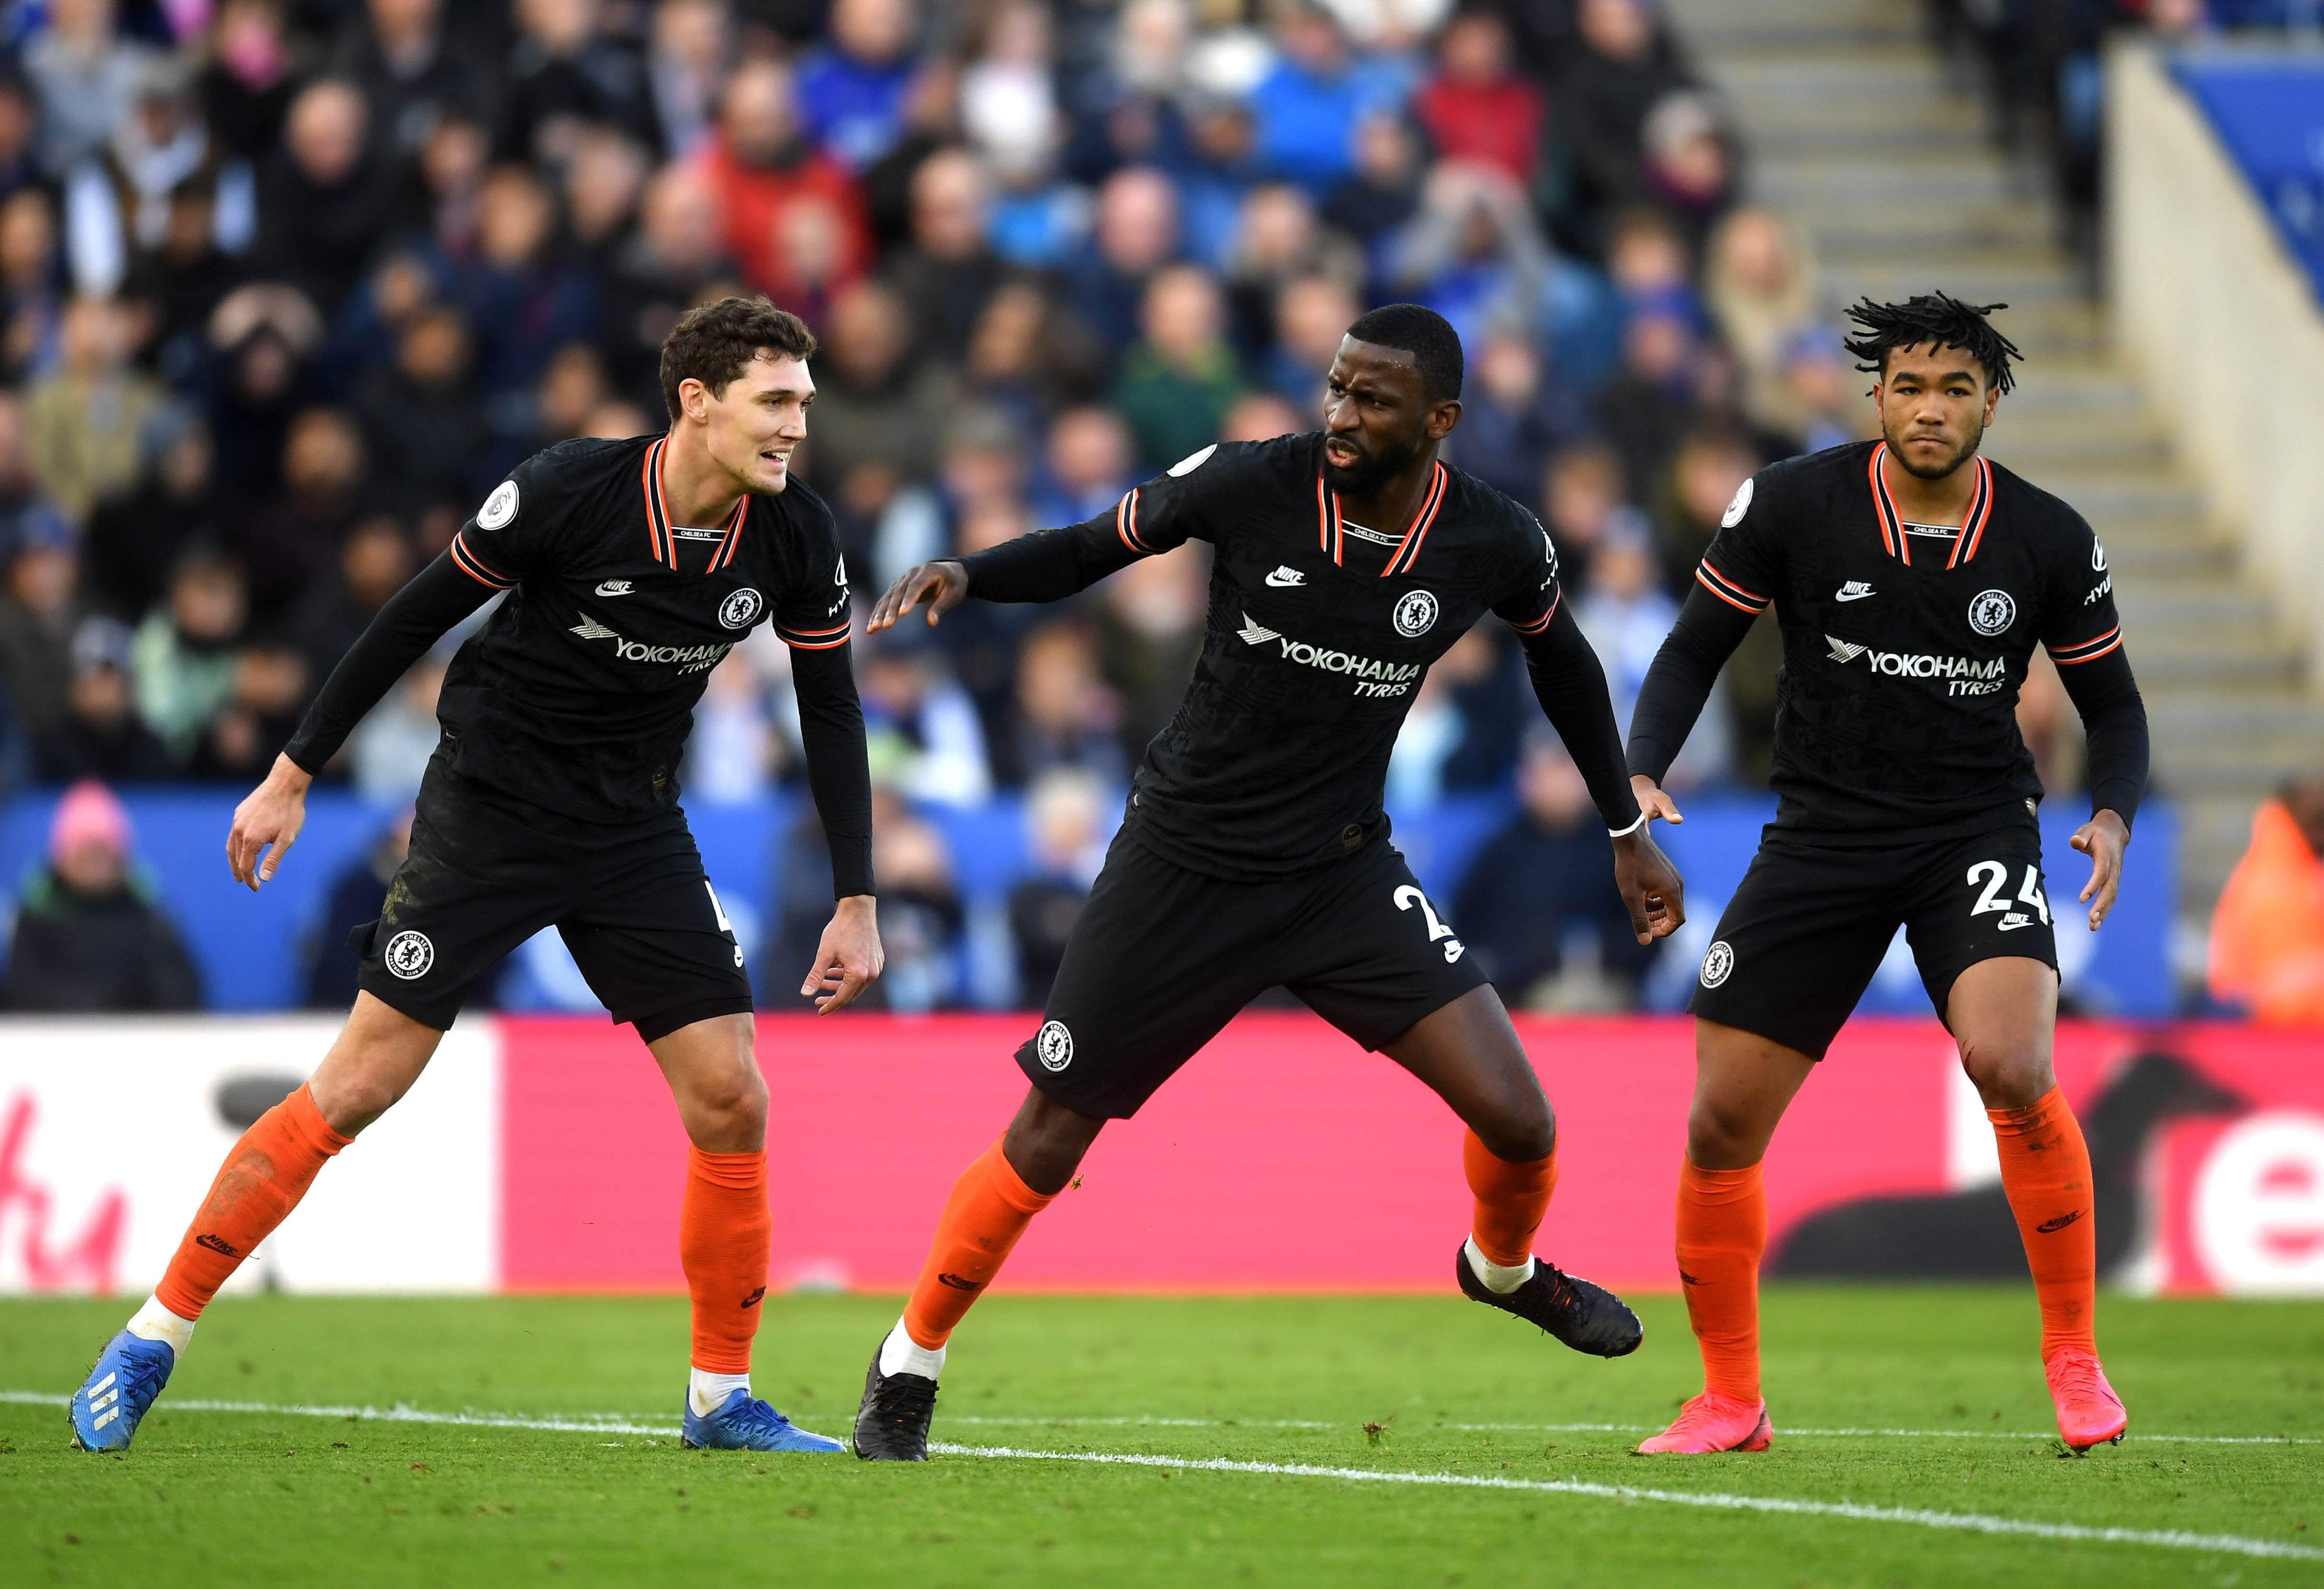 Antonio Rudiger could partner Andreas Christensen at the heart of the Chelsea defence against Crystal Palace. (Photo by Michael Regan/Getty Images)